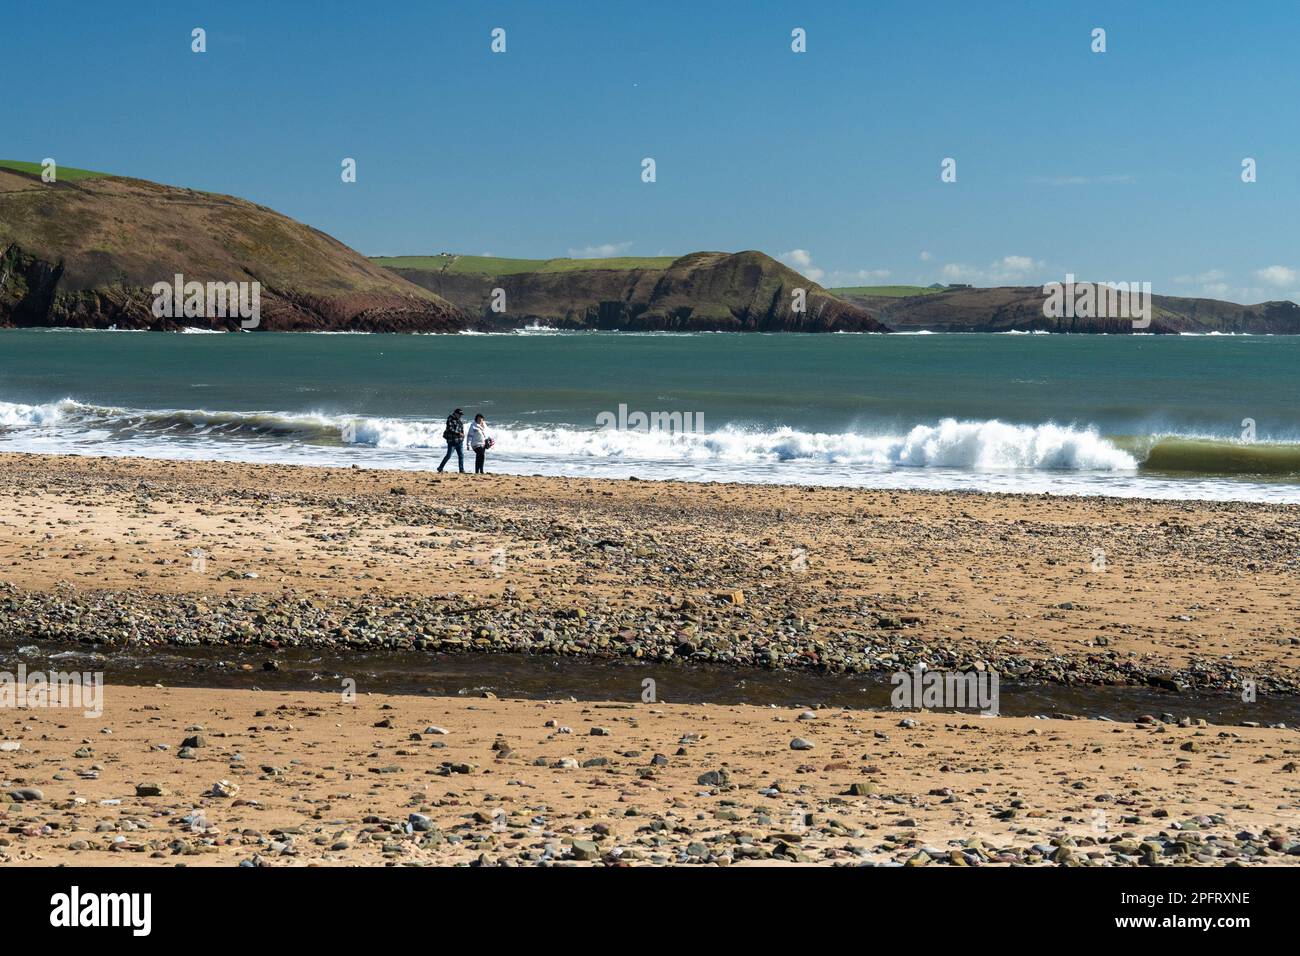 A view of Freshwater East on the Pembrokeshire coast Stock Photo